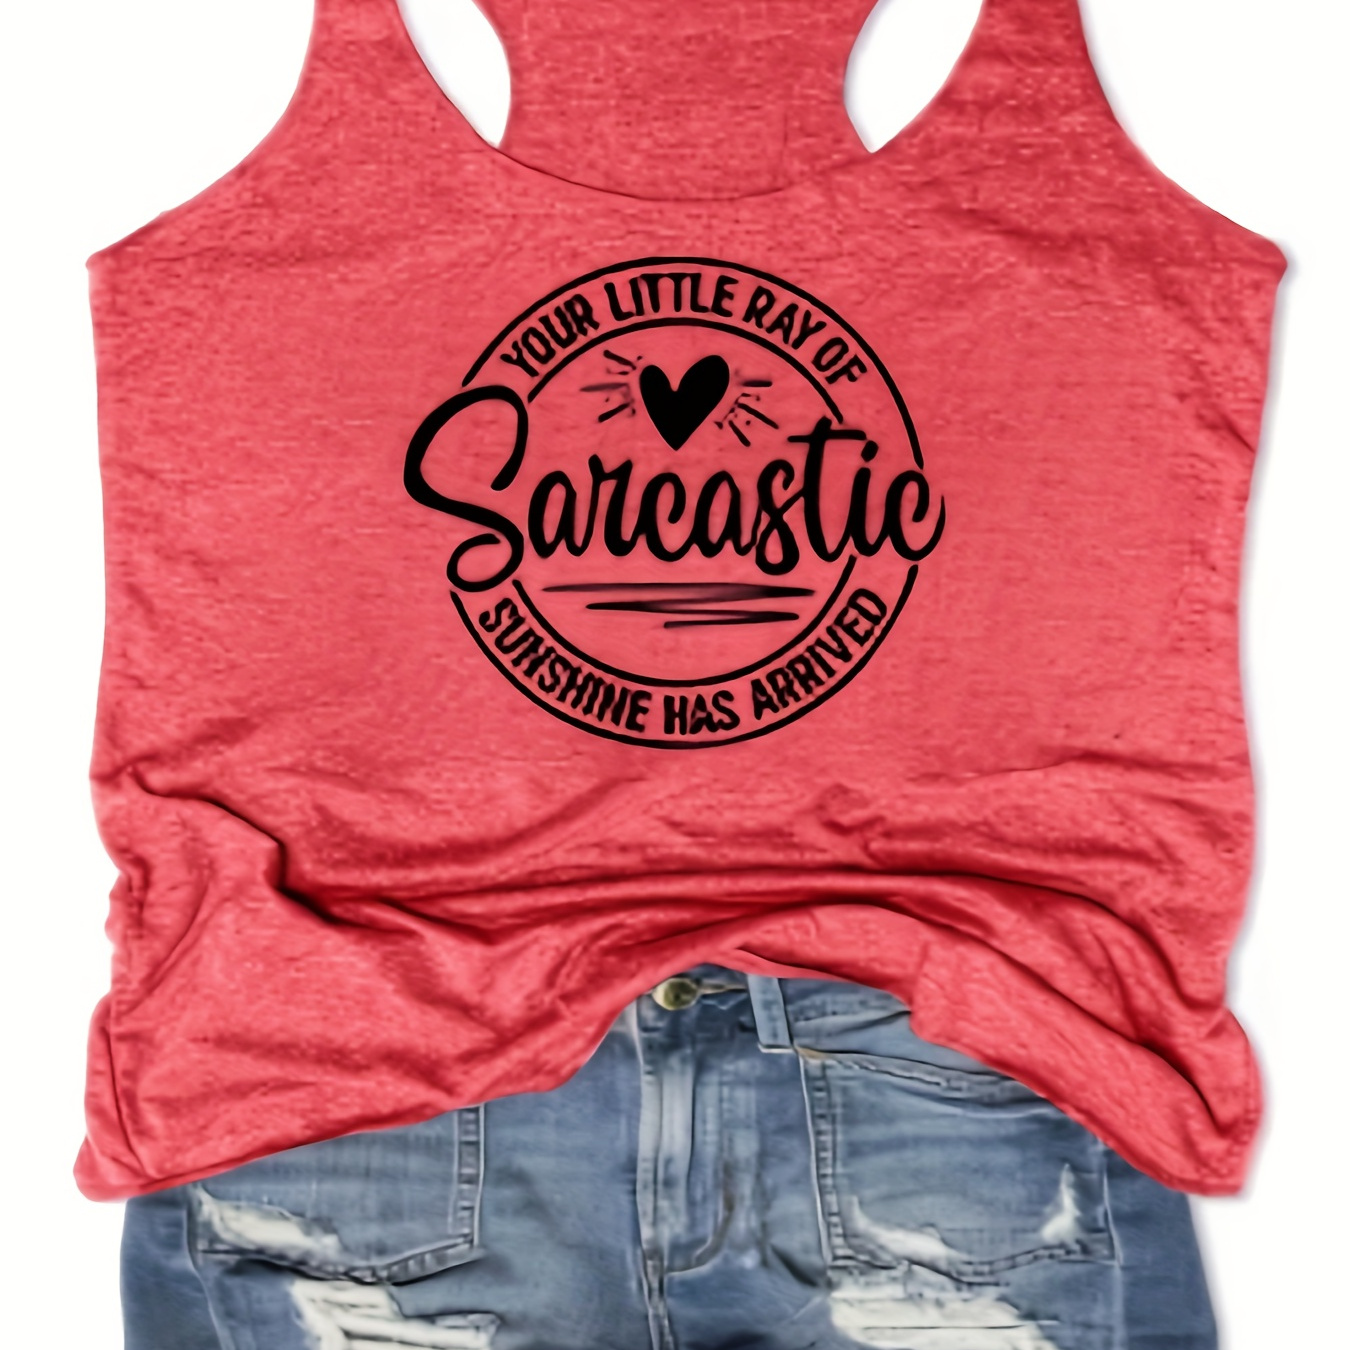 

Women's Fashion Racerback Tank Top, Slim Fit, Casual Style, Printed Graphic "sarcastic Sunshine" - Breathable Summer Sleeveless Shirt